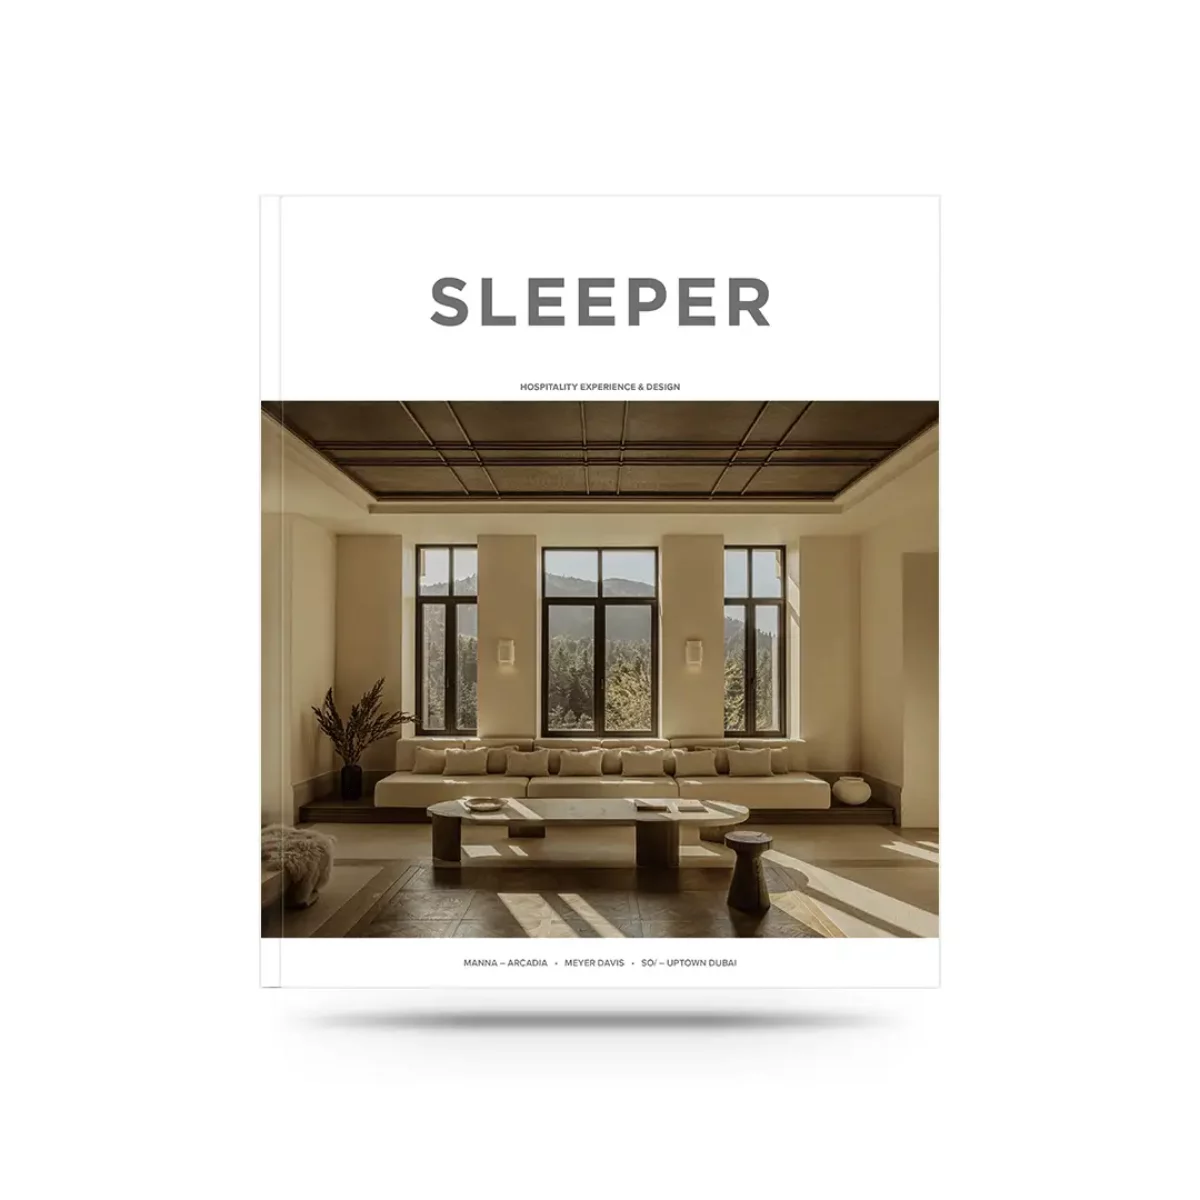 Manna featured on the cover of SLEEPER magazine